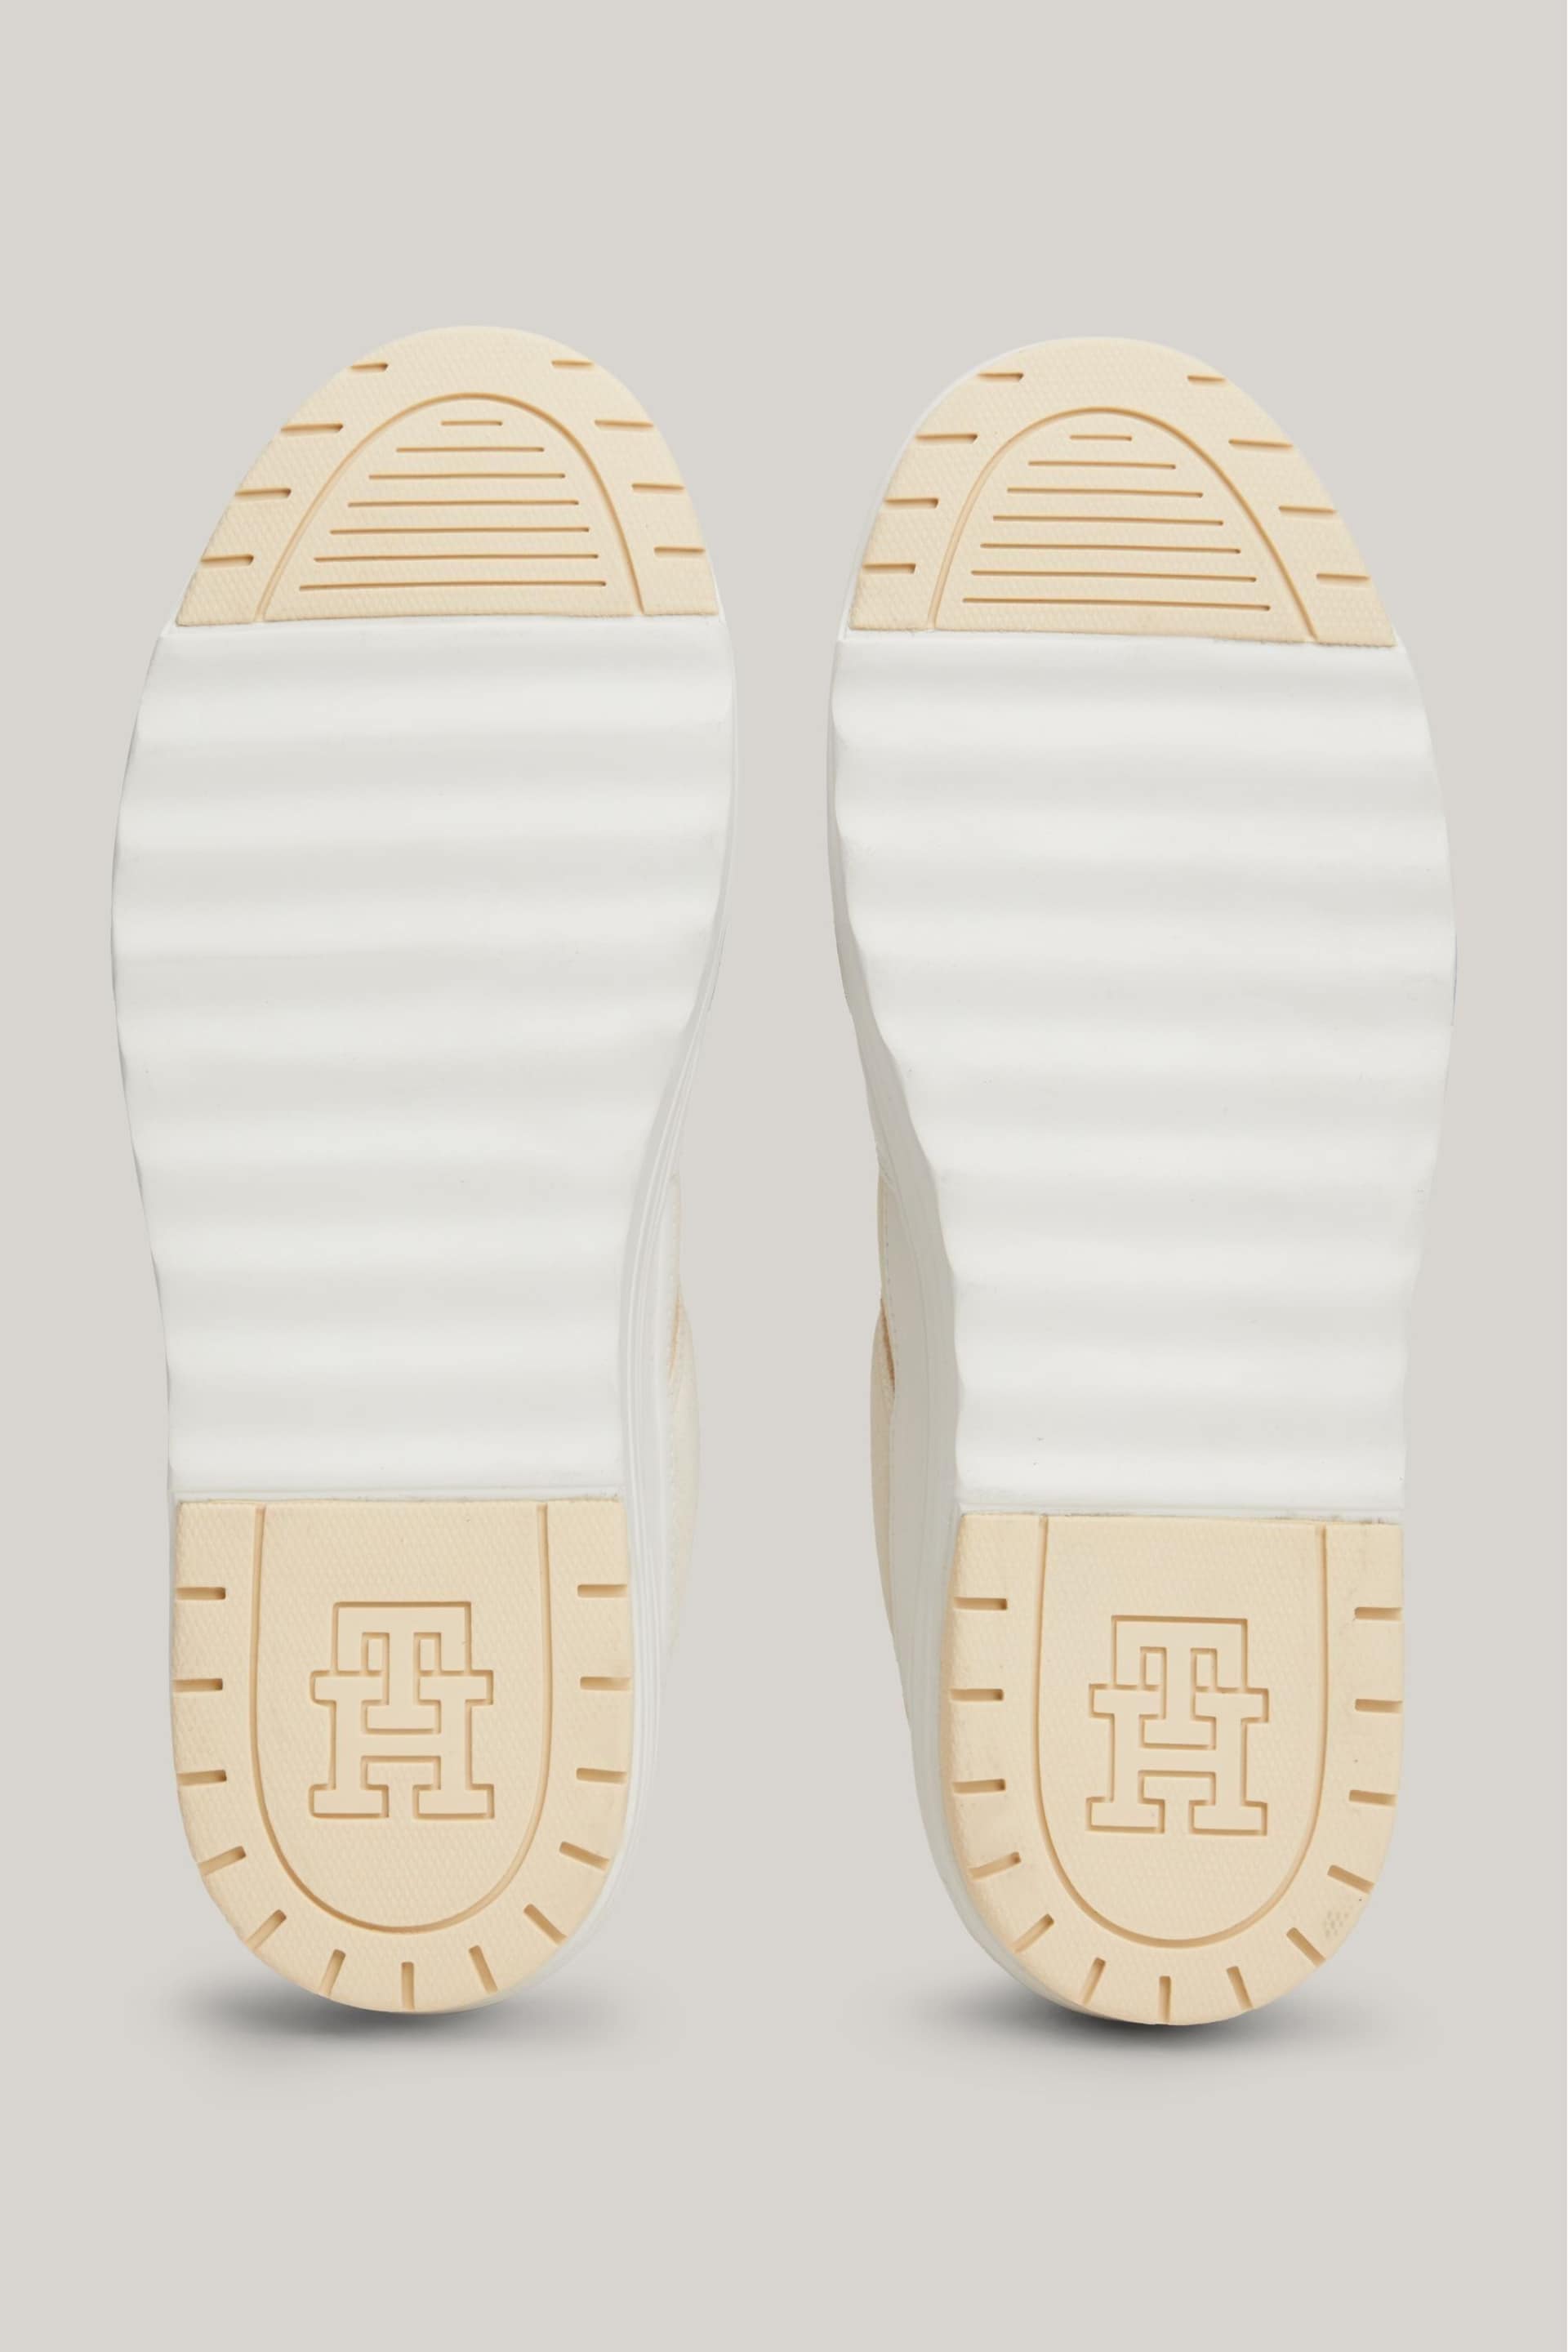 Tommy Hilfiger Cream Suede Stripes Low Top Sneakers - Image 5 of 6